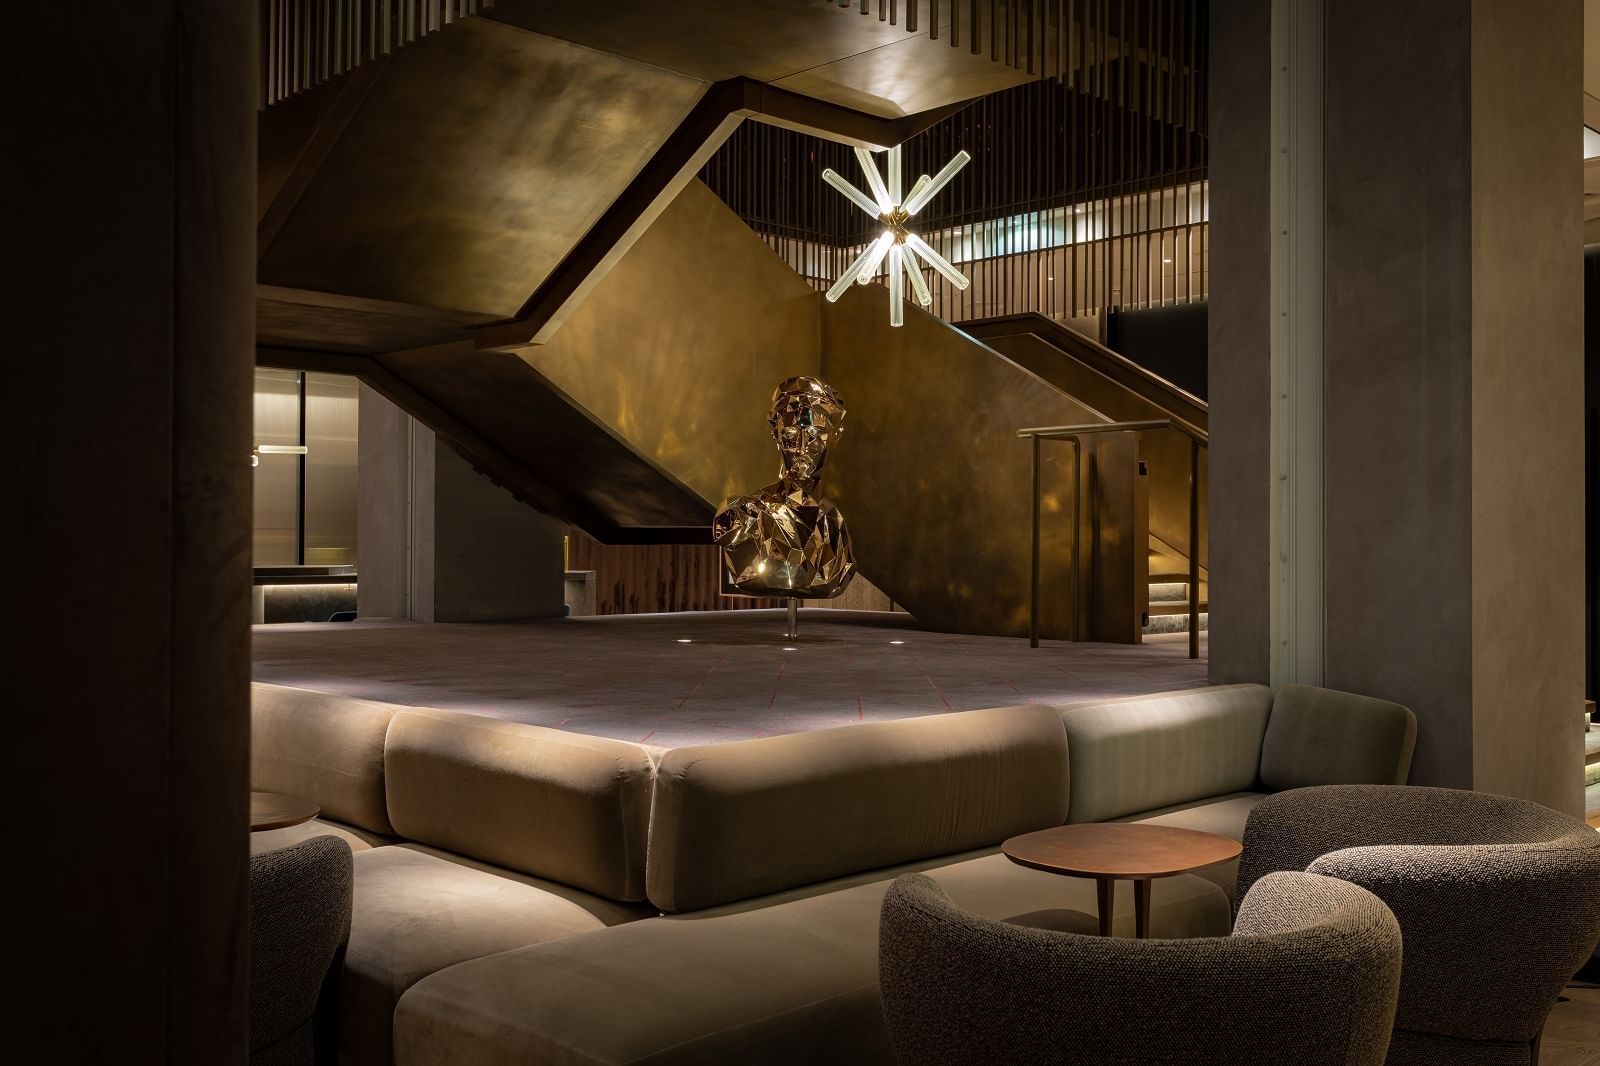 Concept design of Green Room lounge area at The Londoner